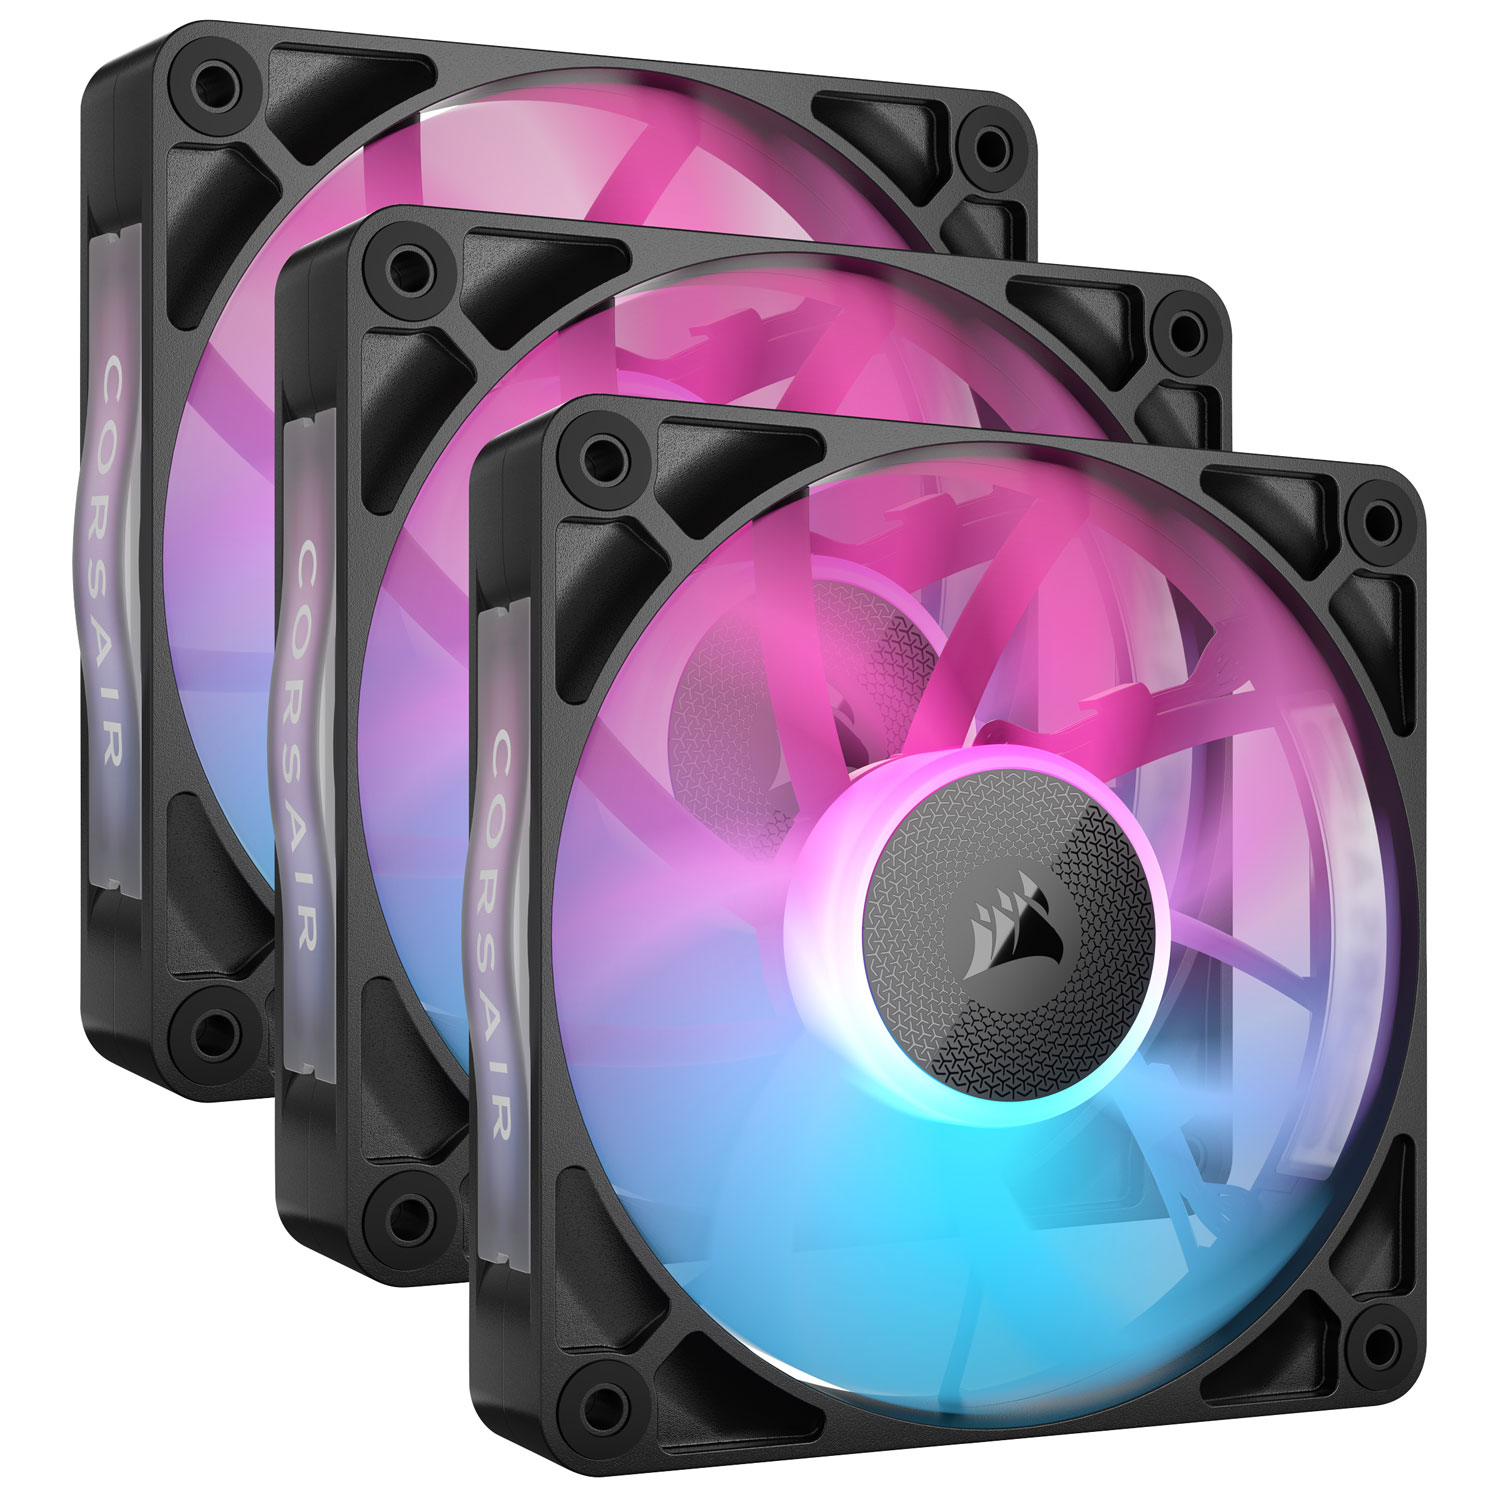 Corsair RX120 RGB 120mm PWM Case Fans with iCUE LINK System Hub - 3 Pack - Black - Only at Best Buy